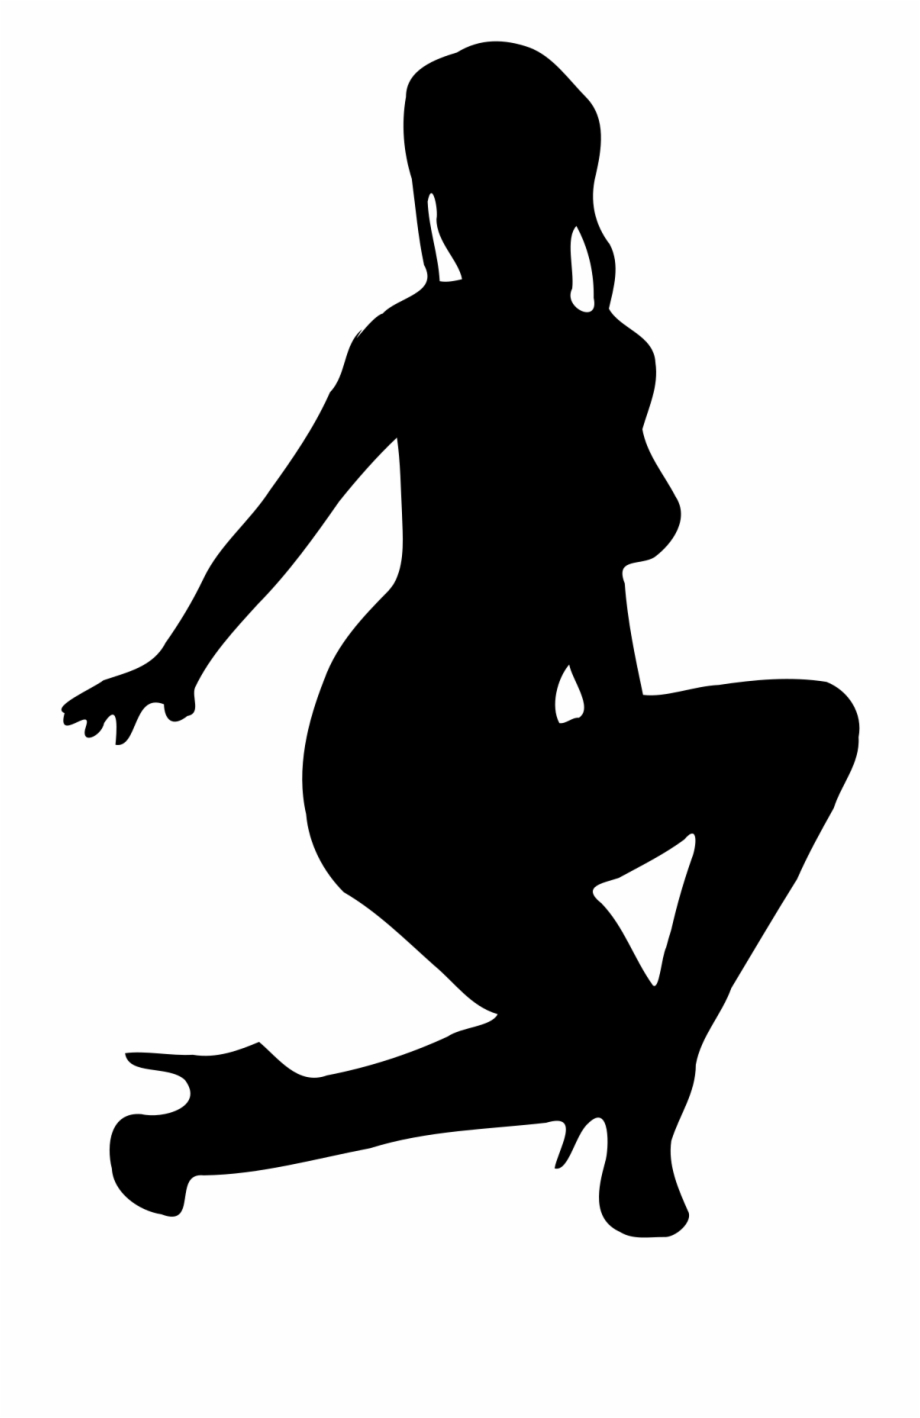 This Free Icons Png Design Of Woman Silhouette